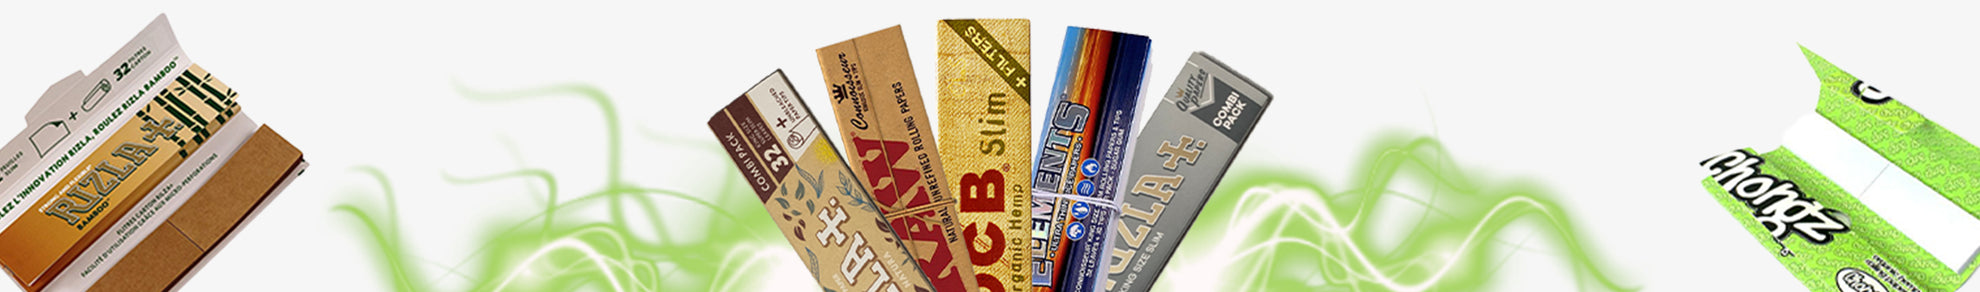 Connoisseur Rolling Papers & Tips